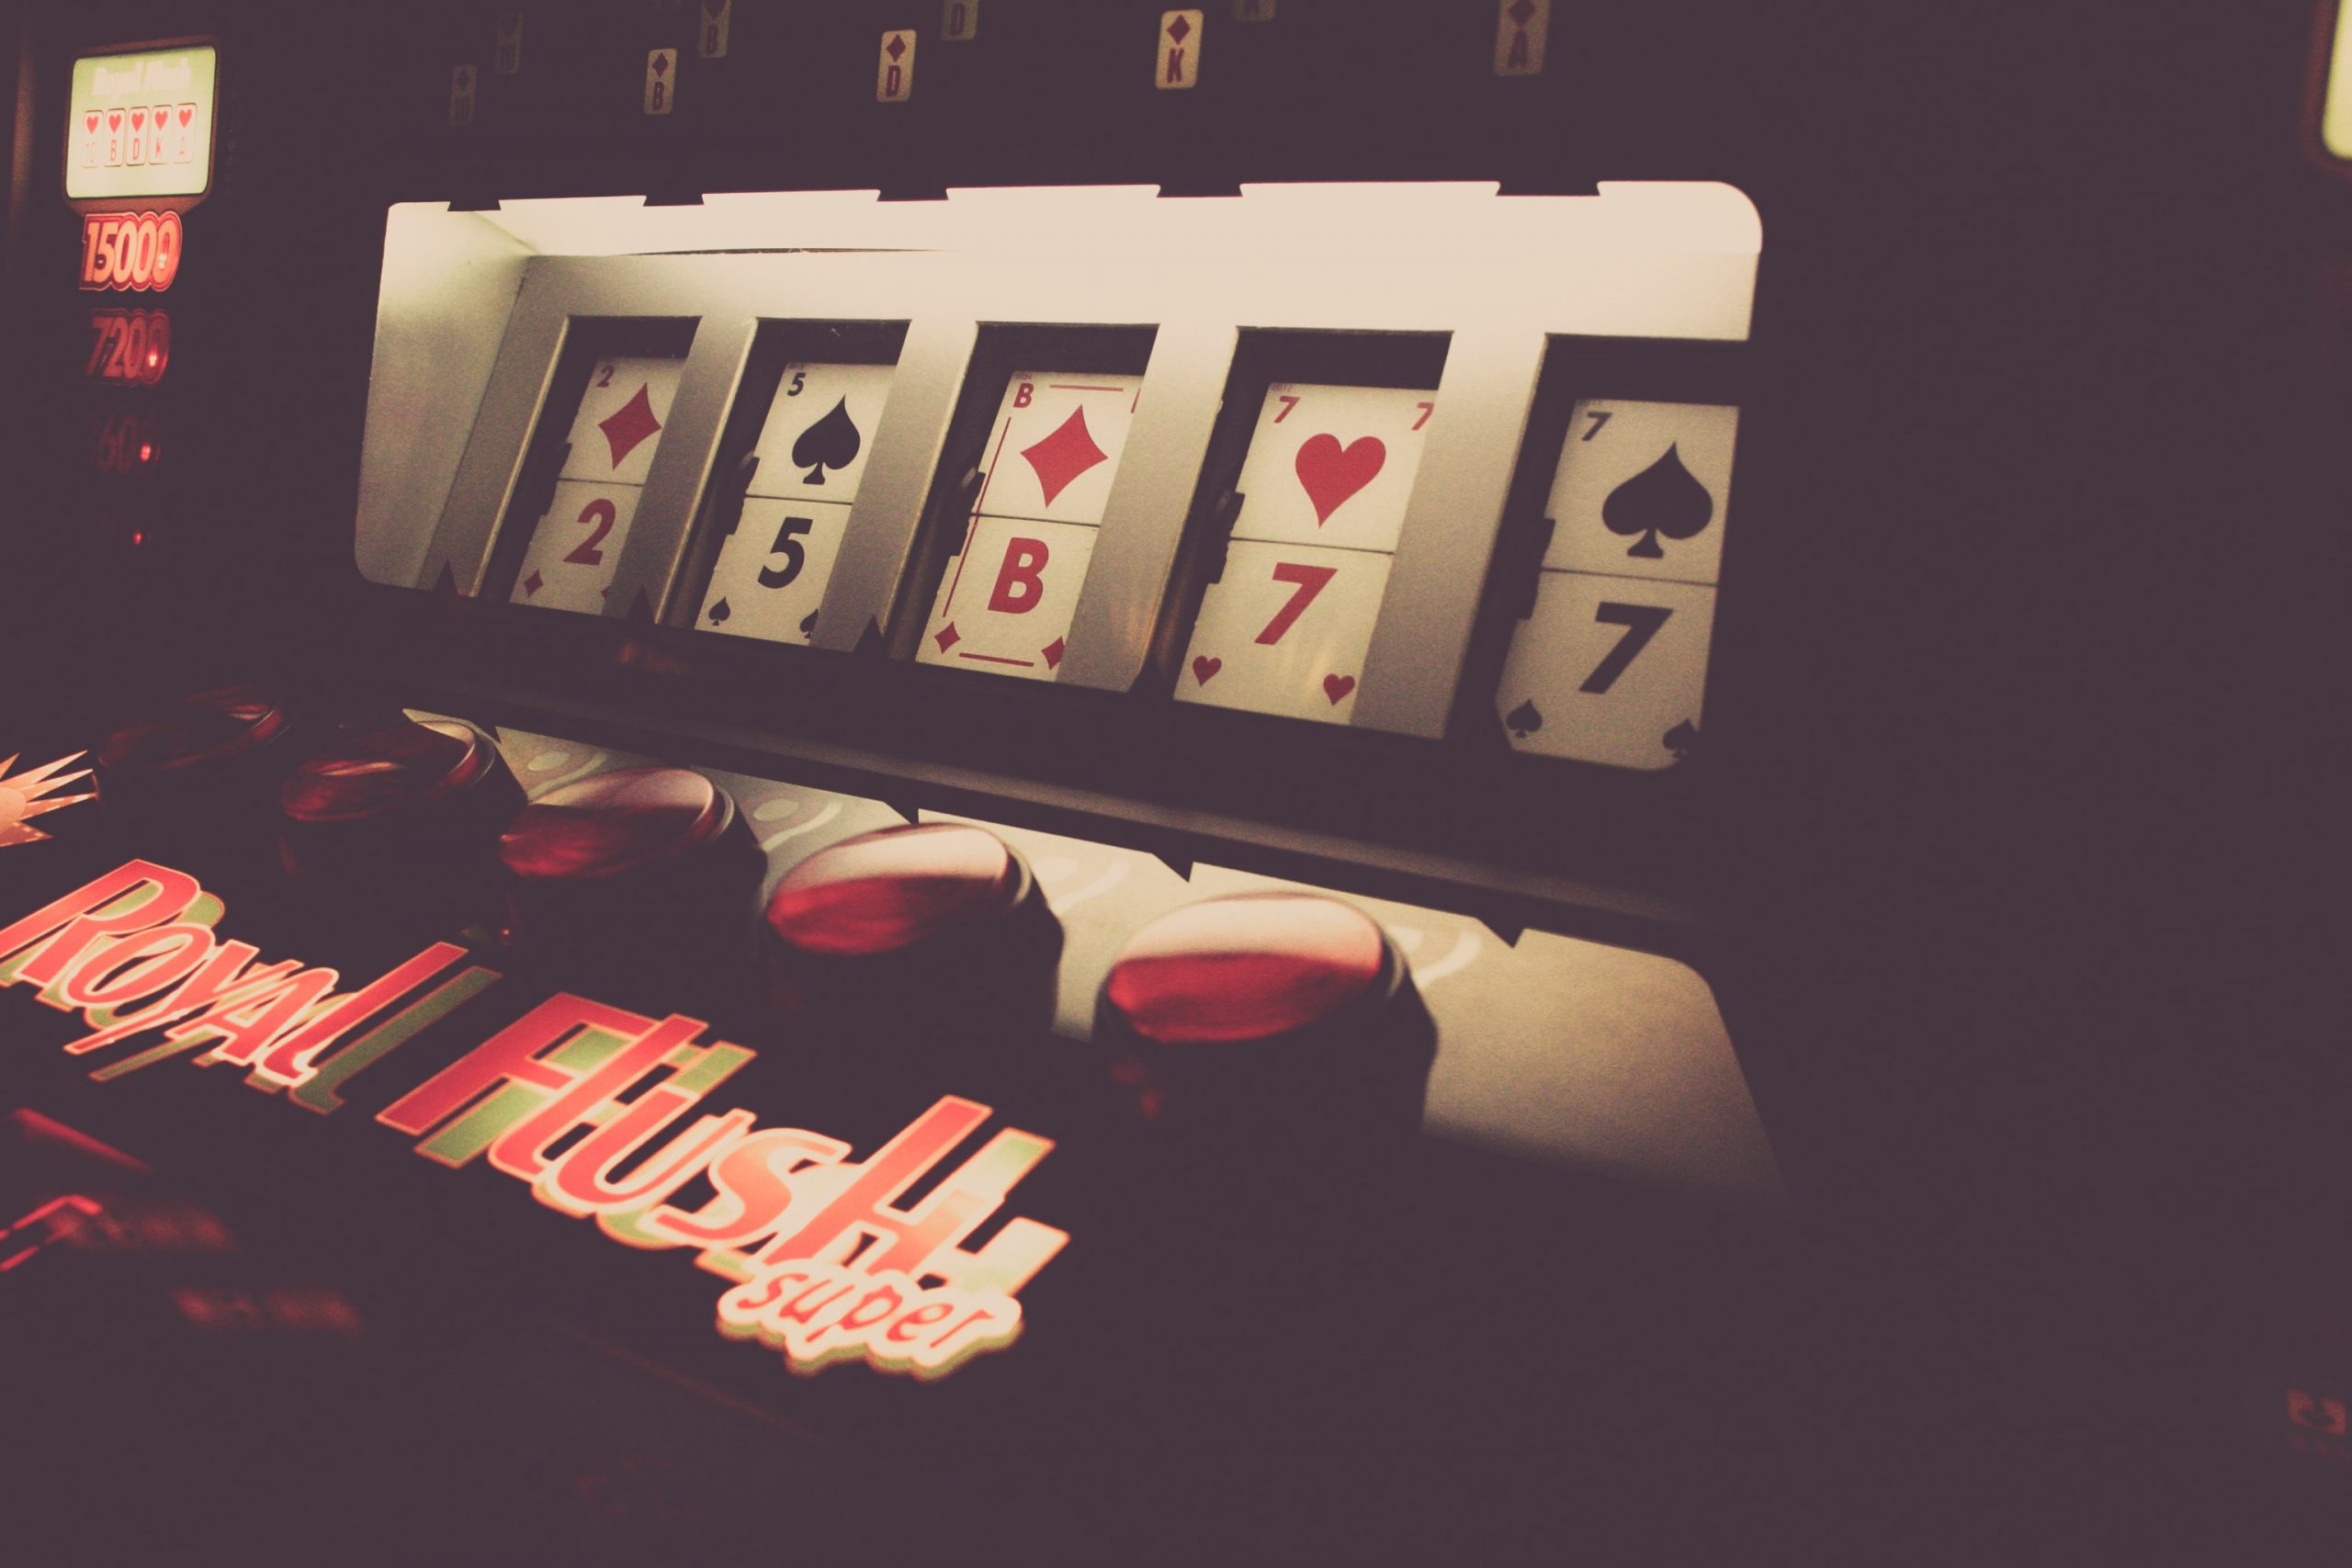 Best casino Android/iPhone Apps